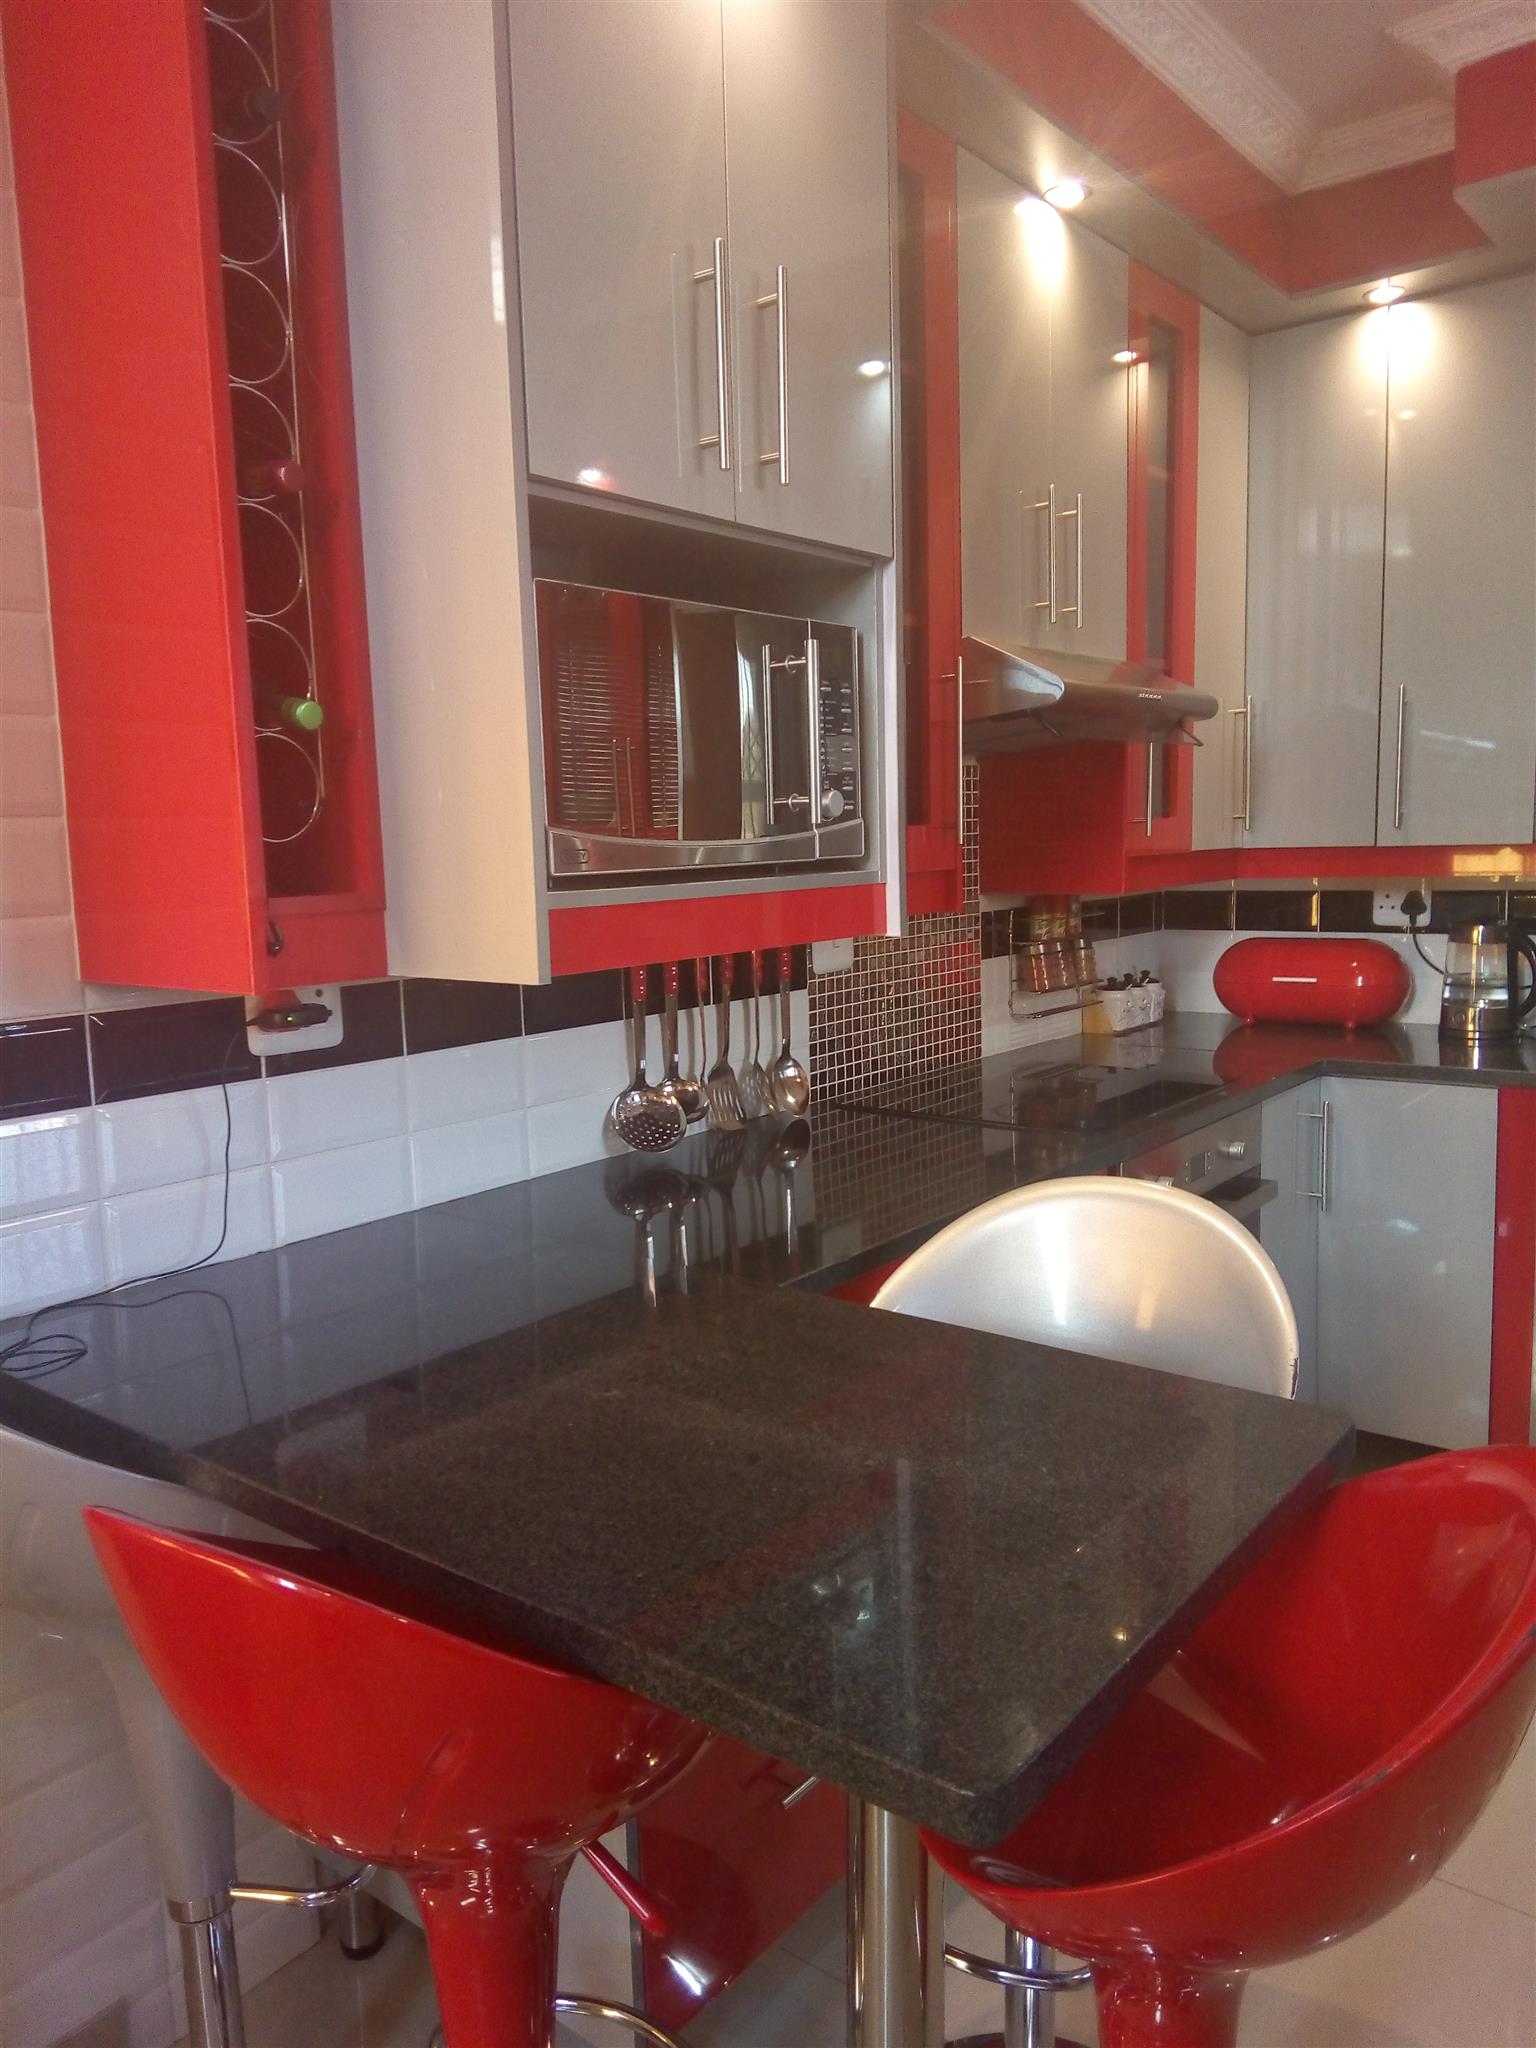 Three Bedroom Flat/Apartment to Rent in Kya Sands Estate/Bloubosrand.